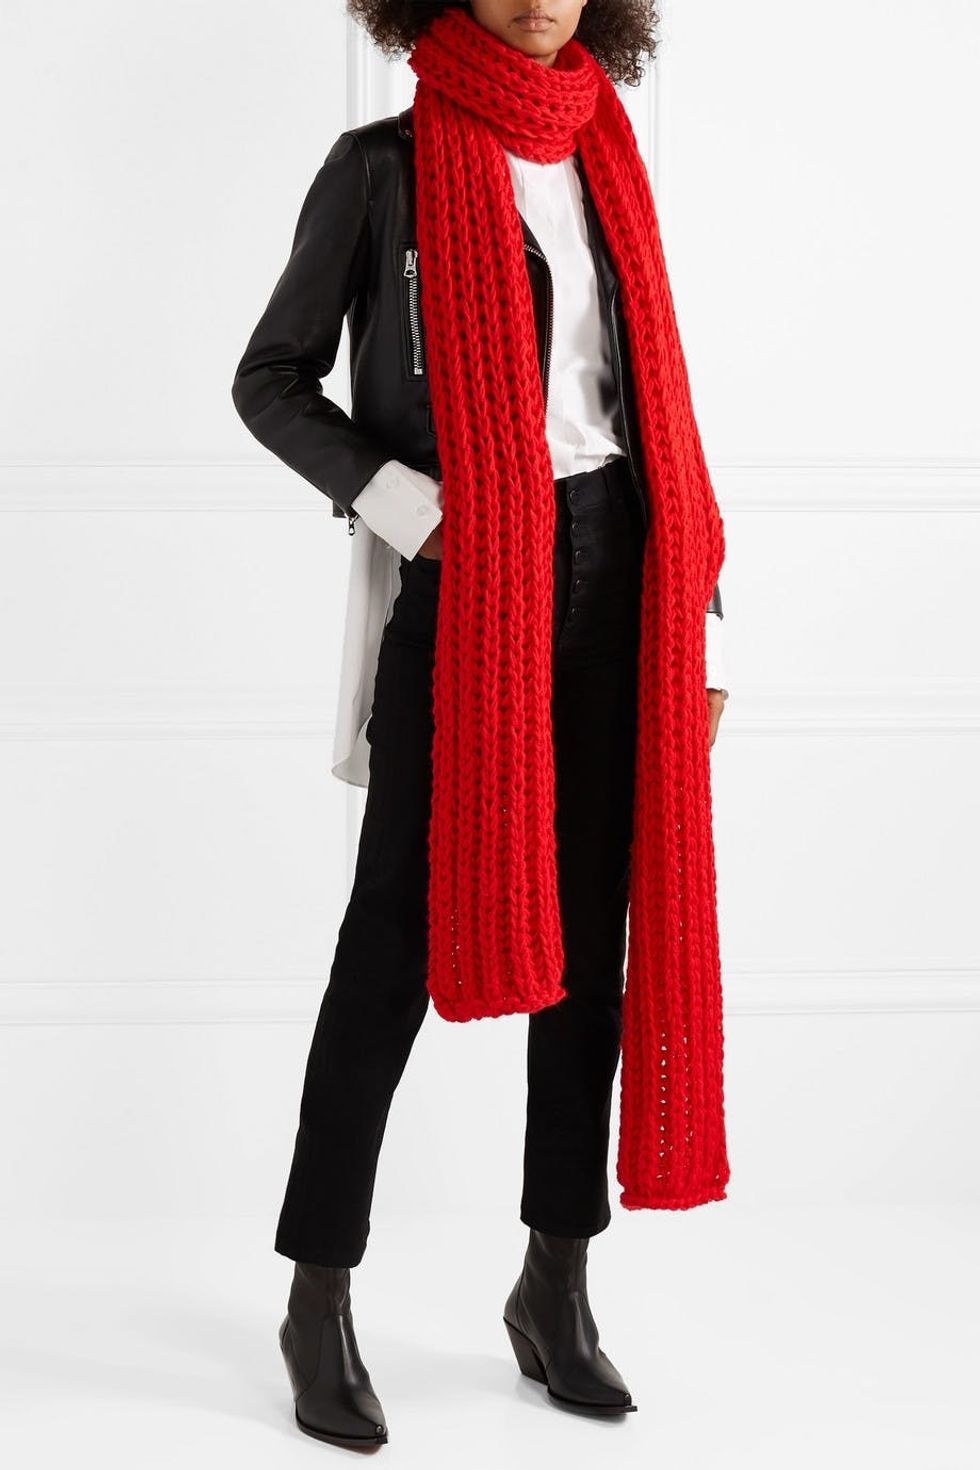 The Oversized Scarf Trend We All Want in On - Brit + Co